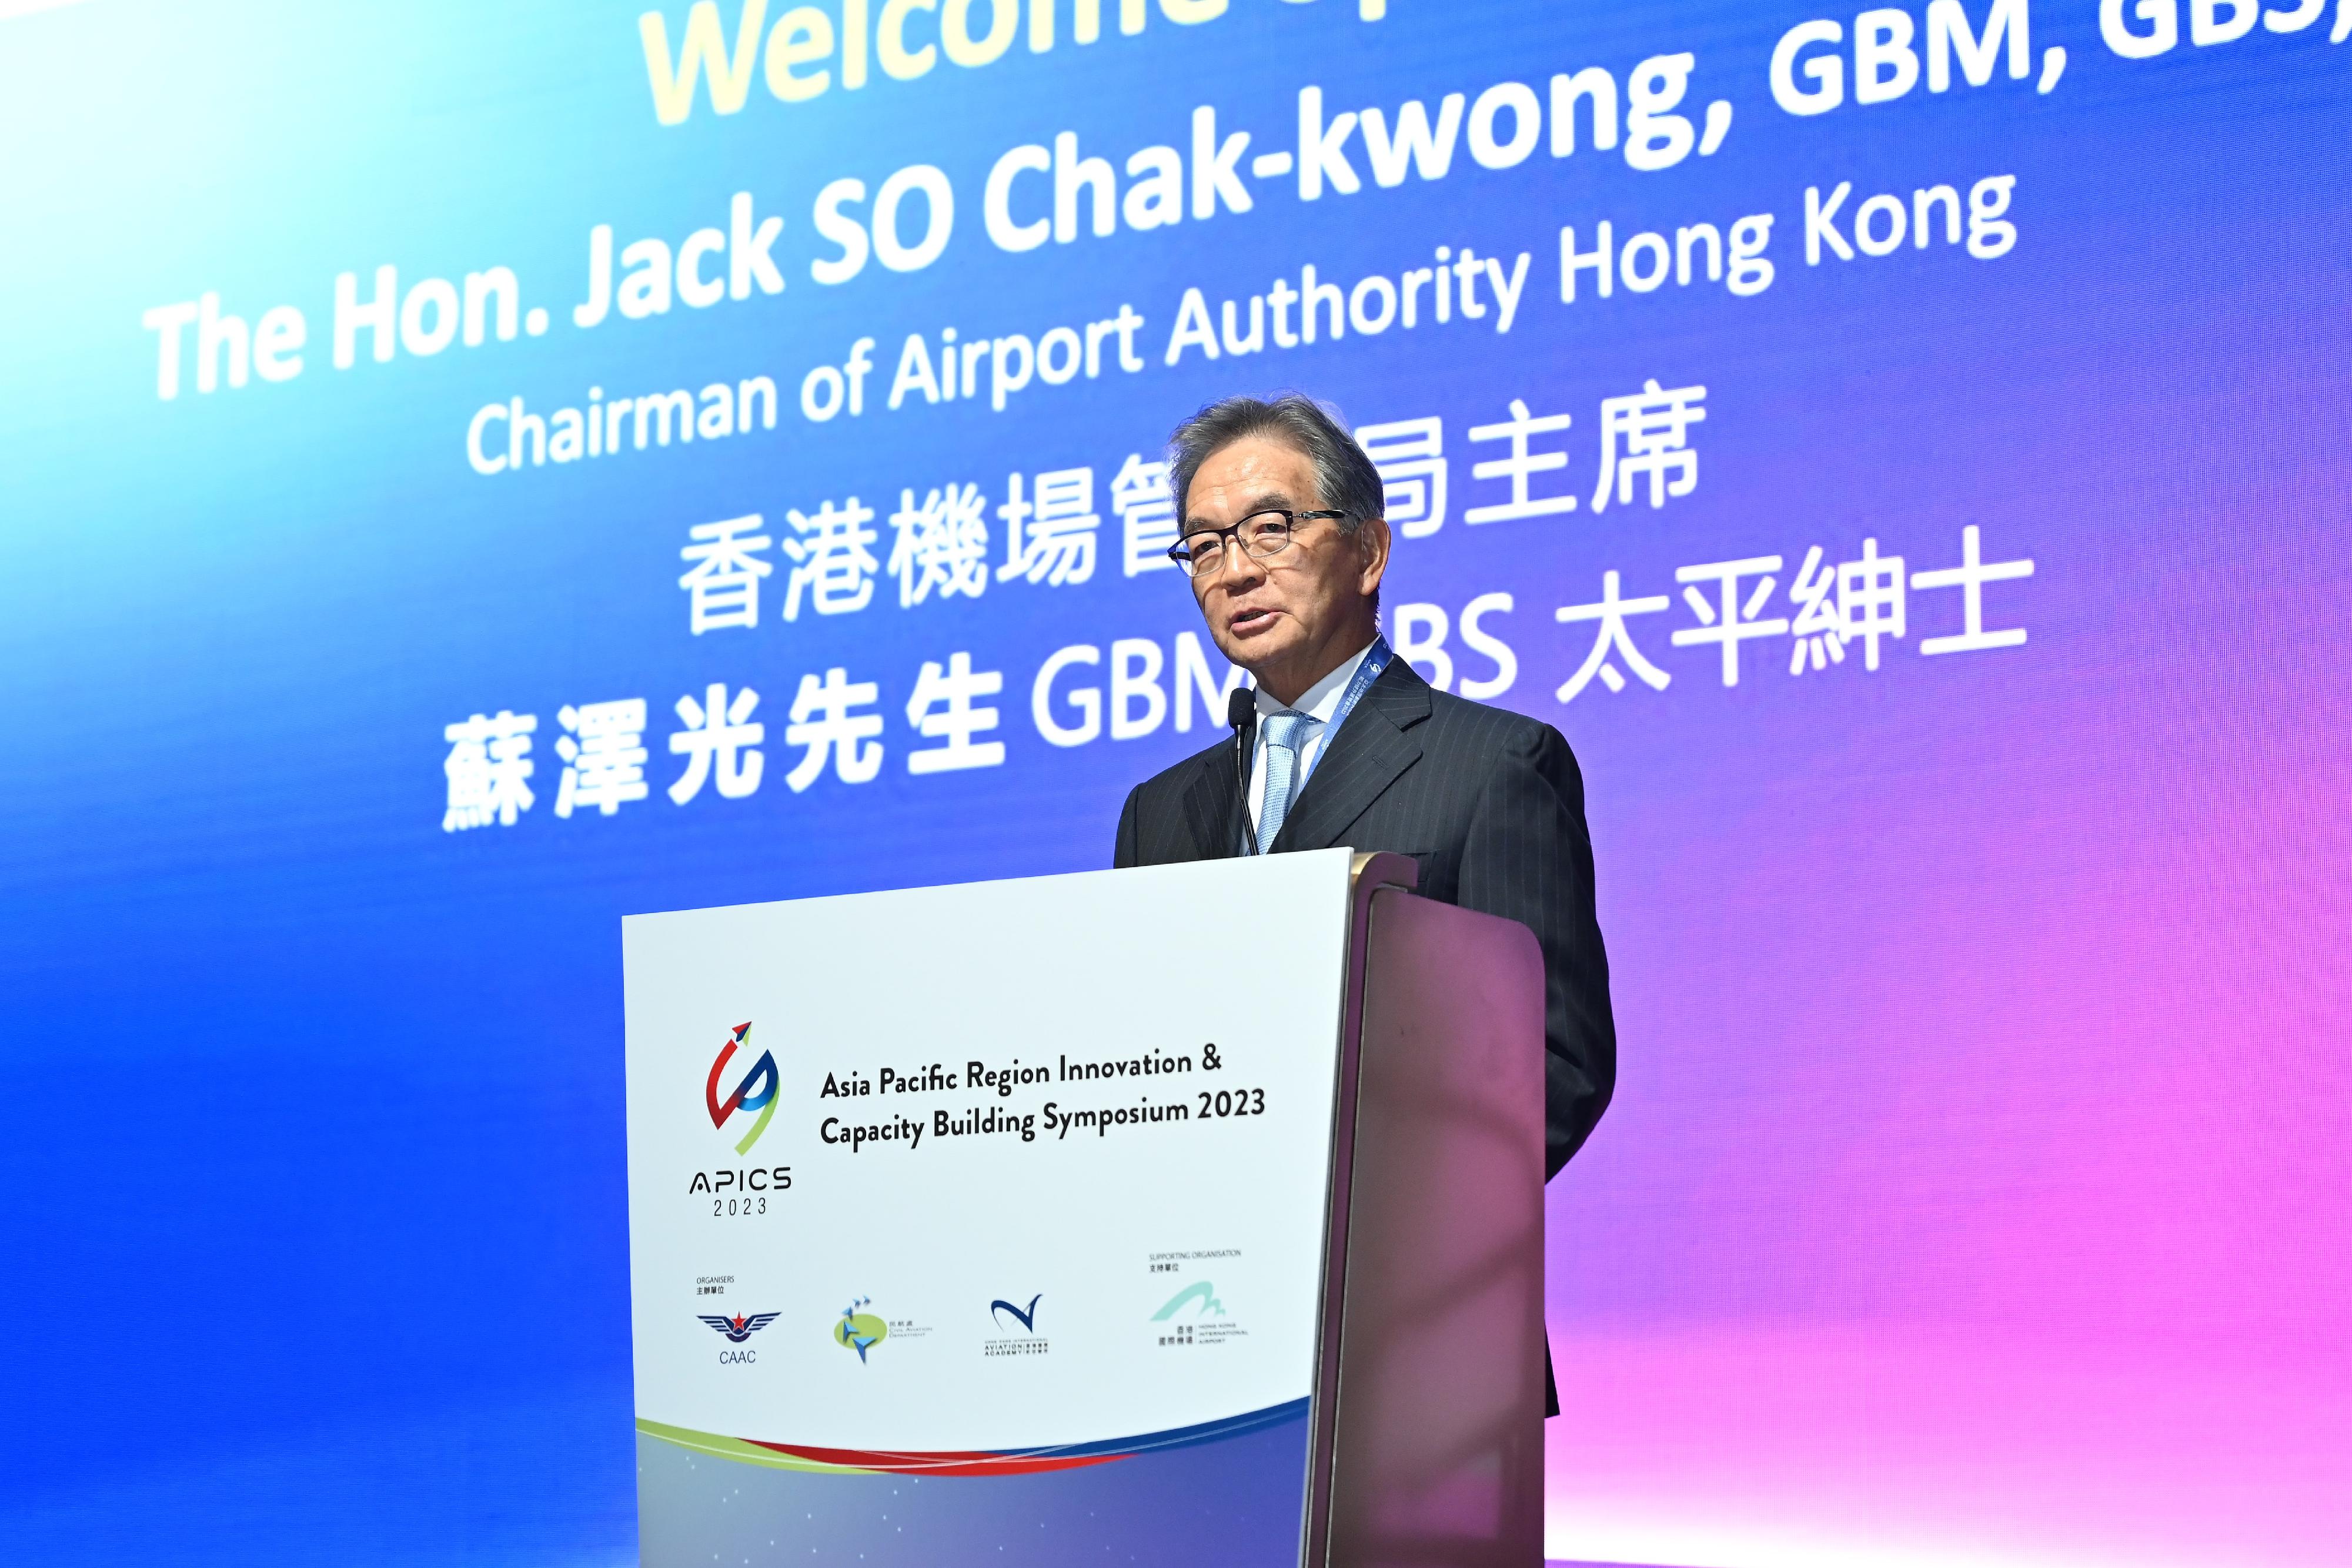 The Asia Pacific Region Innovation & Capacity Building Symposium 2023 (APICS 2023) commenced today (December 14). Photo shows the Chairman of the Airport Authority Hong Kong, Mr Jack So, delivering opening remarks at the APICS 2023 opening ceremony.